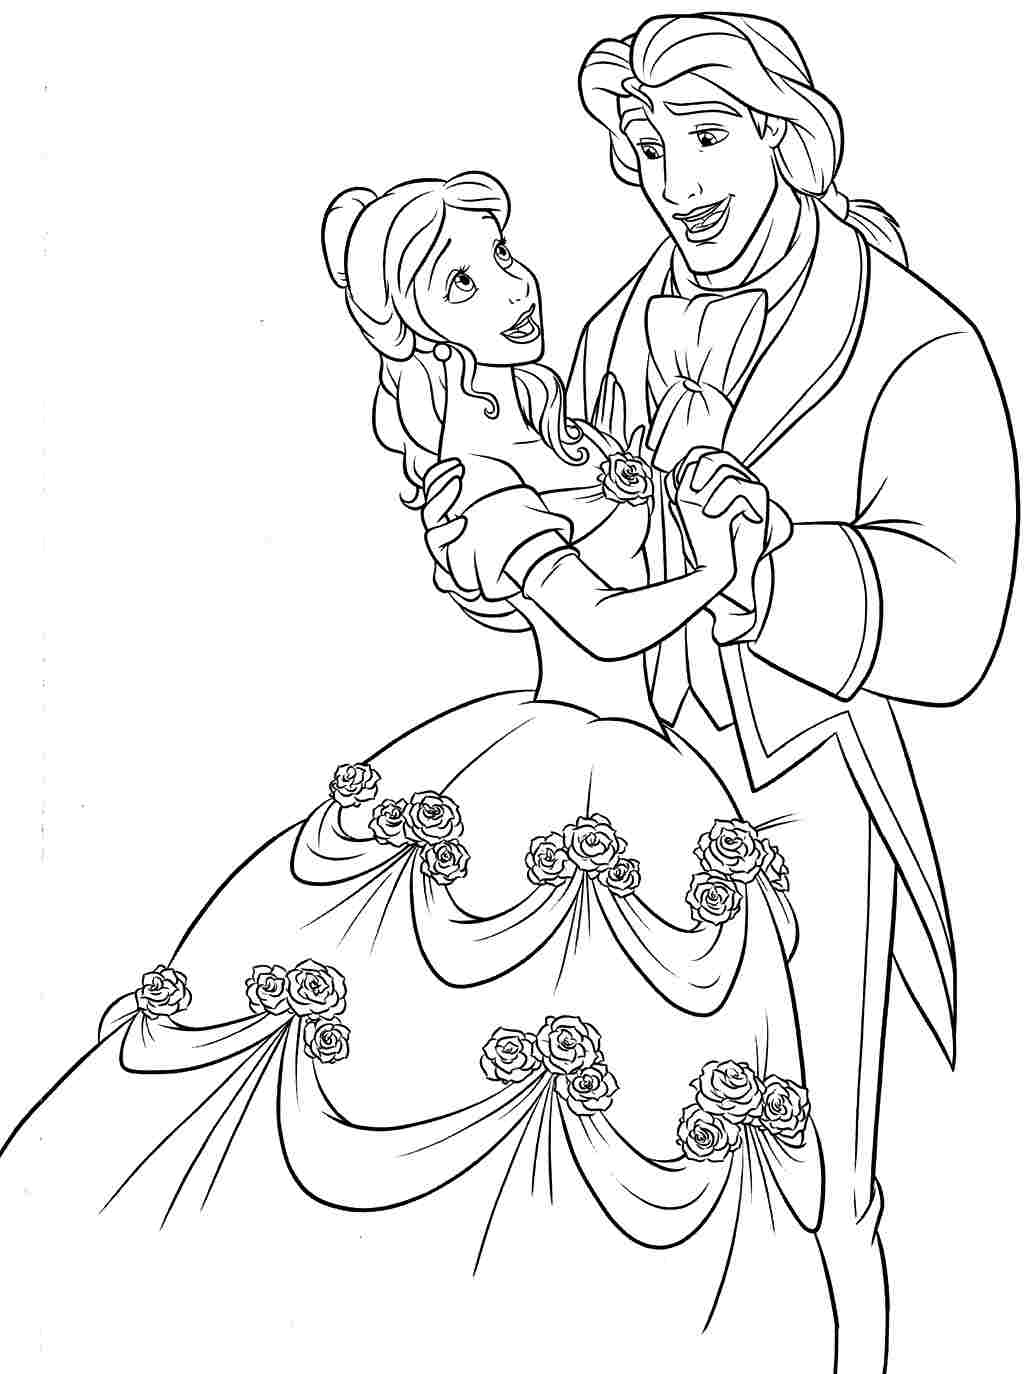 The Beauty and the Beast (Animation Movies) – Page 4 – Printable coloring pages